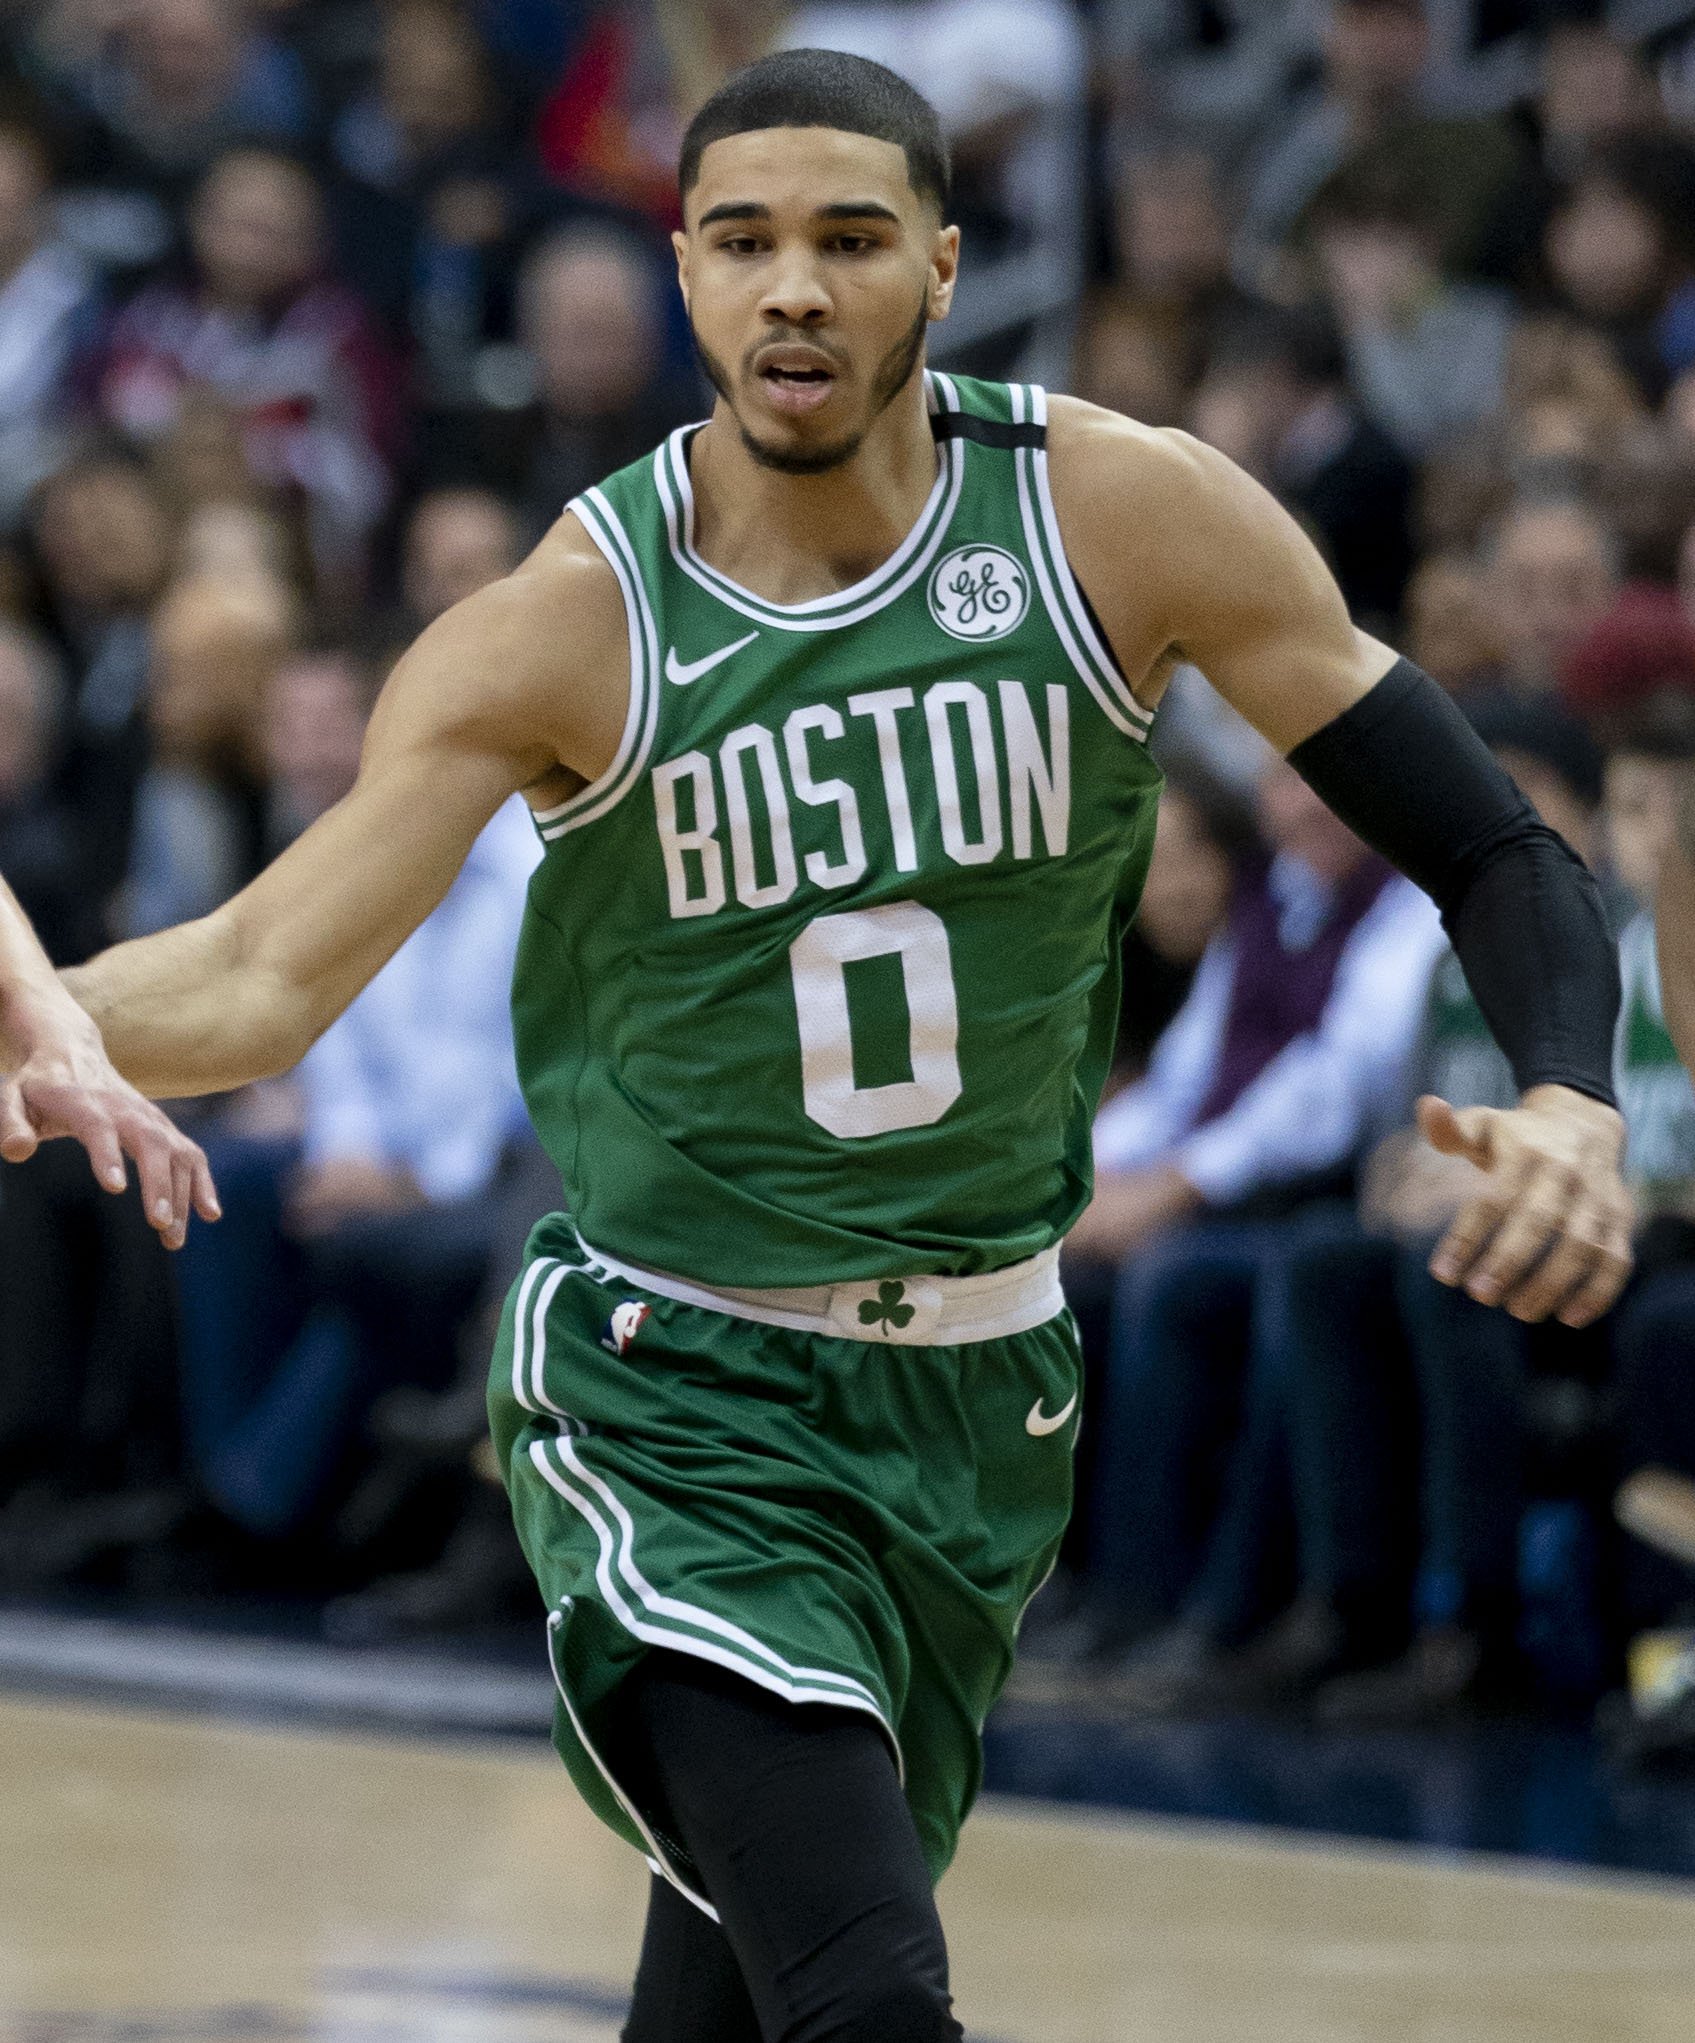 Jayson Tatum of the Celtics at a game against the Wizards on 8 October, 2018.  | Photo by Keith Allison, Jayson Tatum (2018), CC BY-SA 2.0, Wikimedia Commons